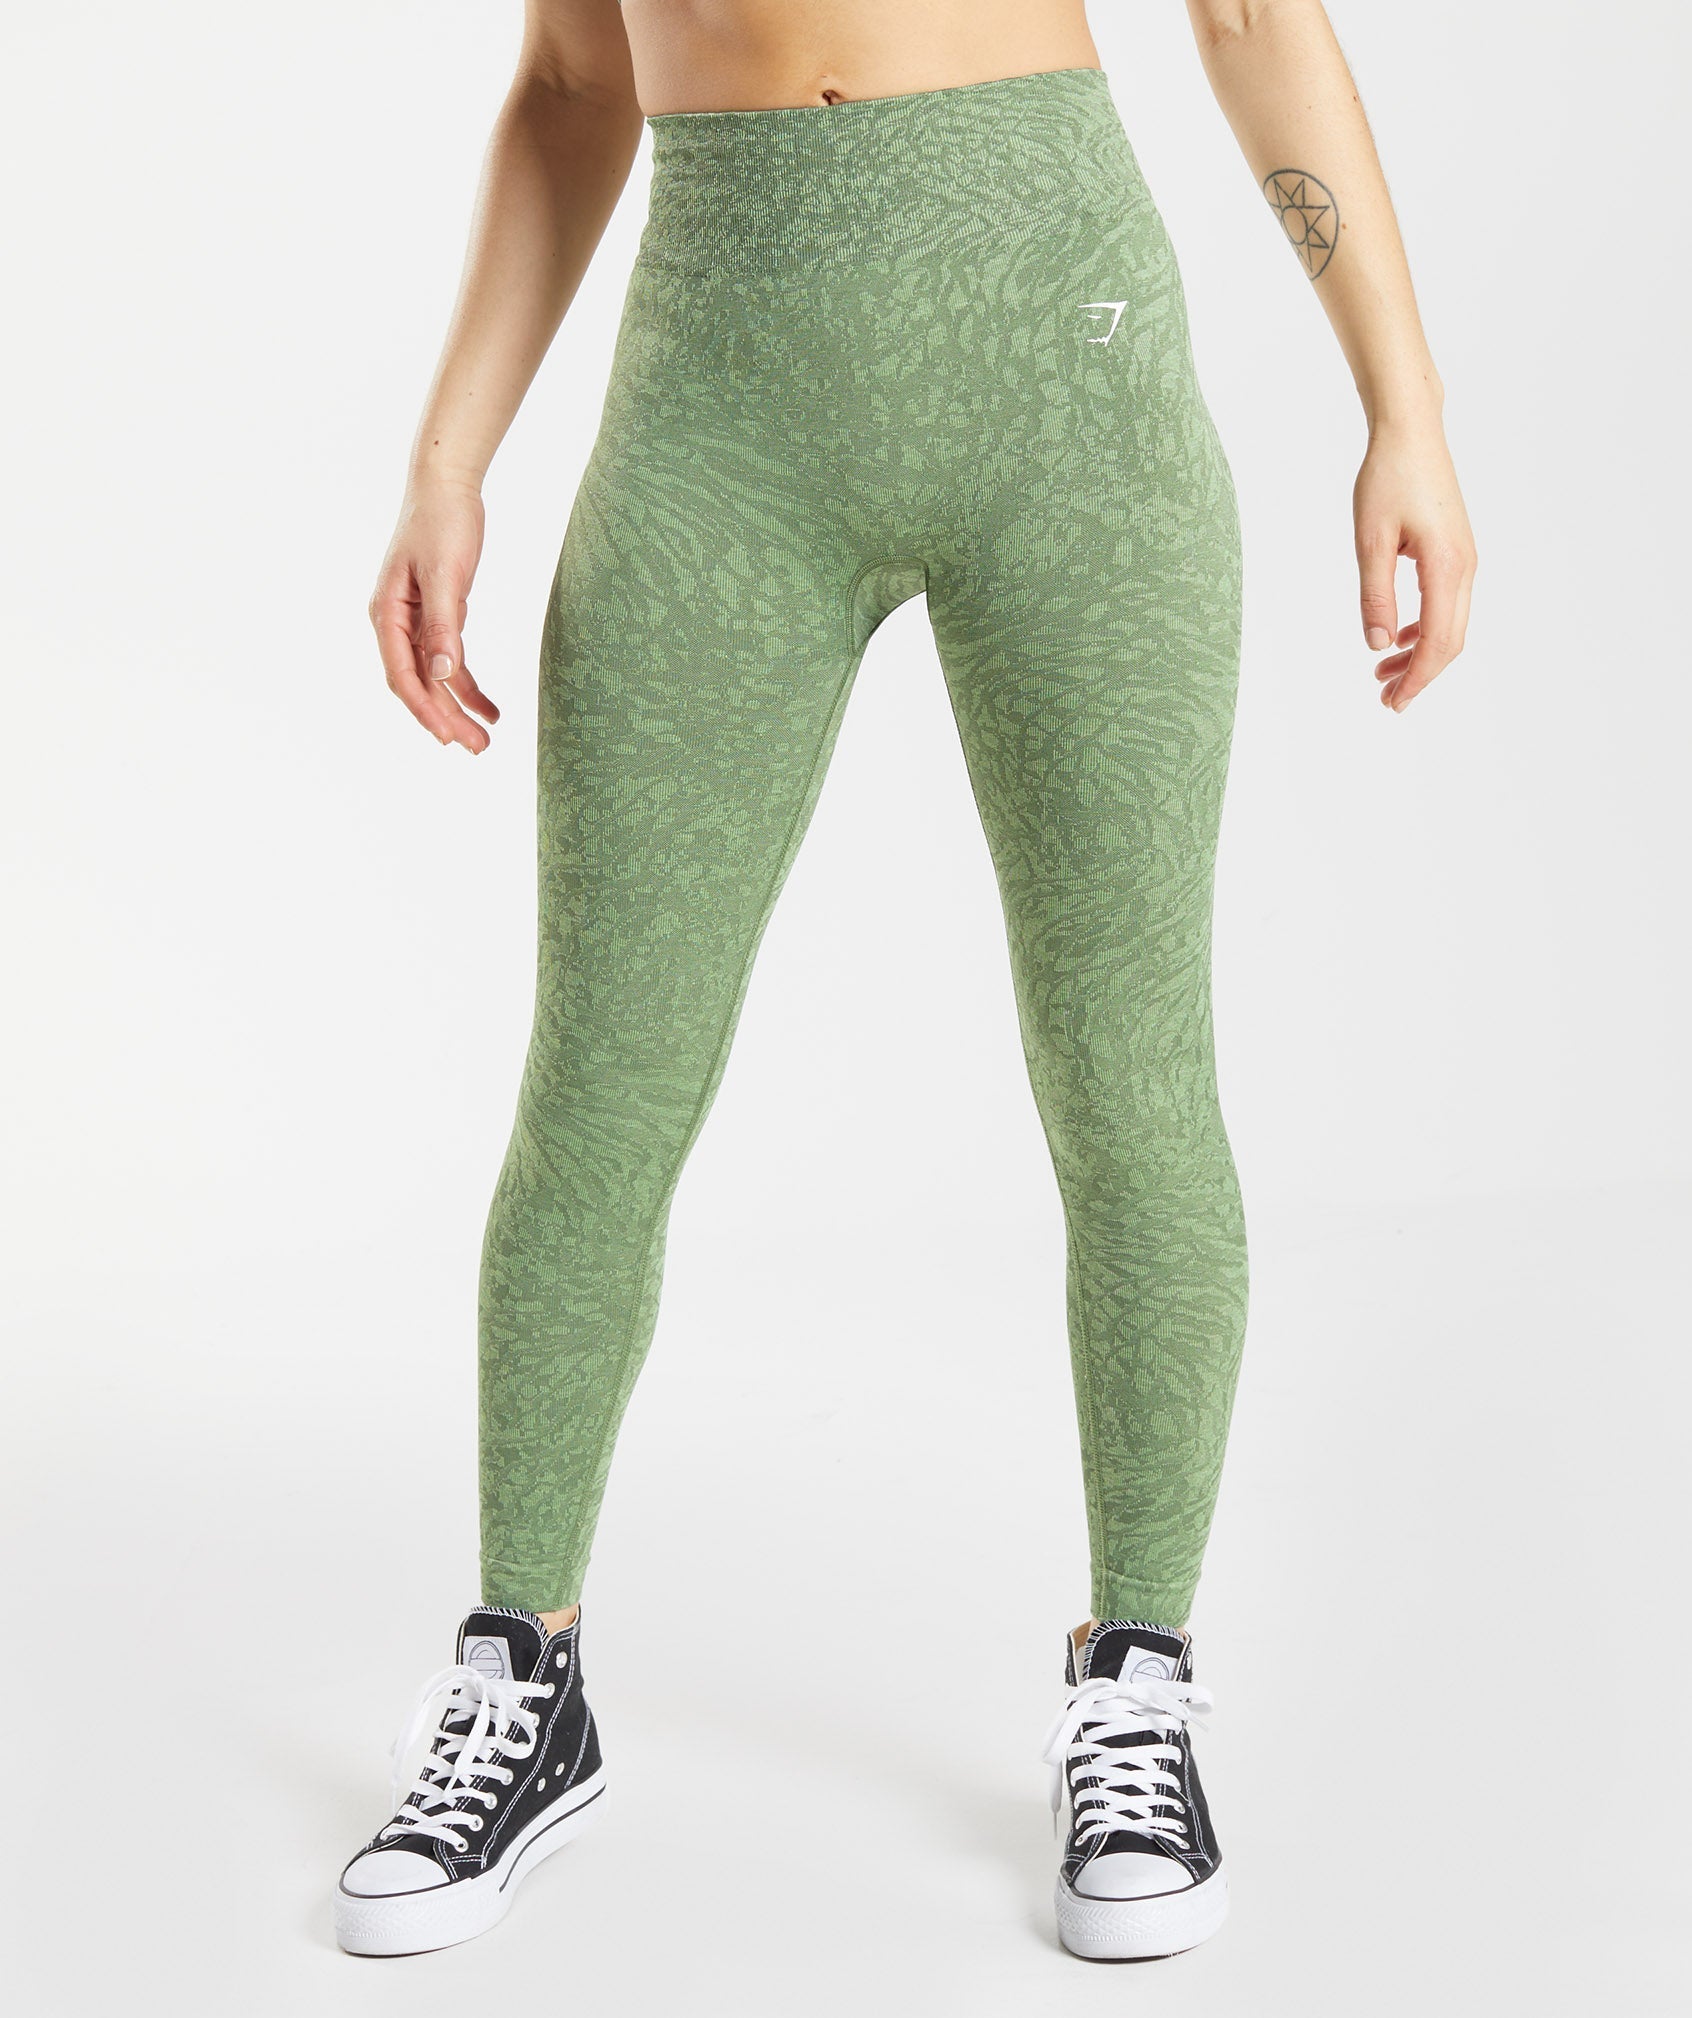 Gymshark Adapt Ombre Seamless Leggings Gray - $30 (50% Off Retail) - From  Christina